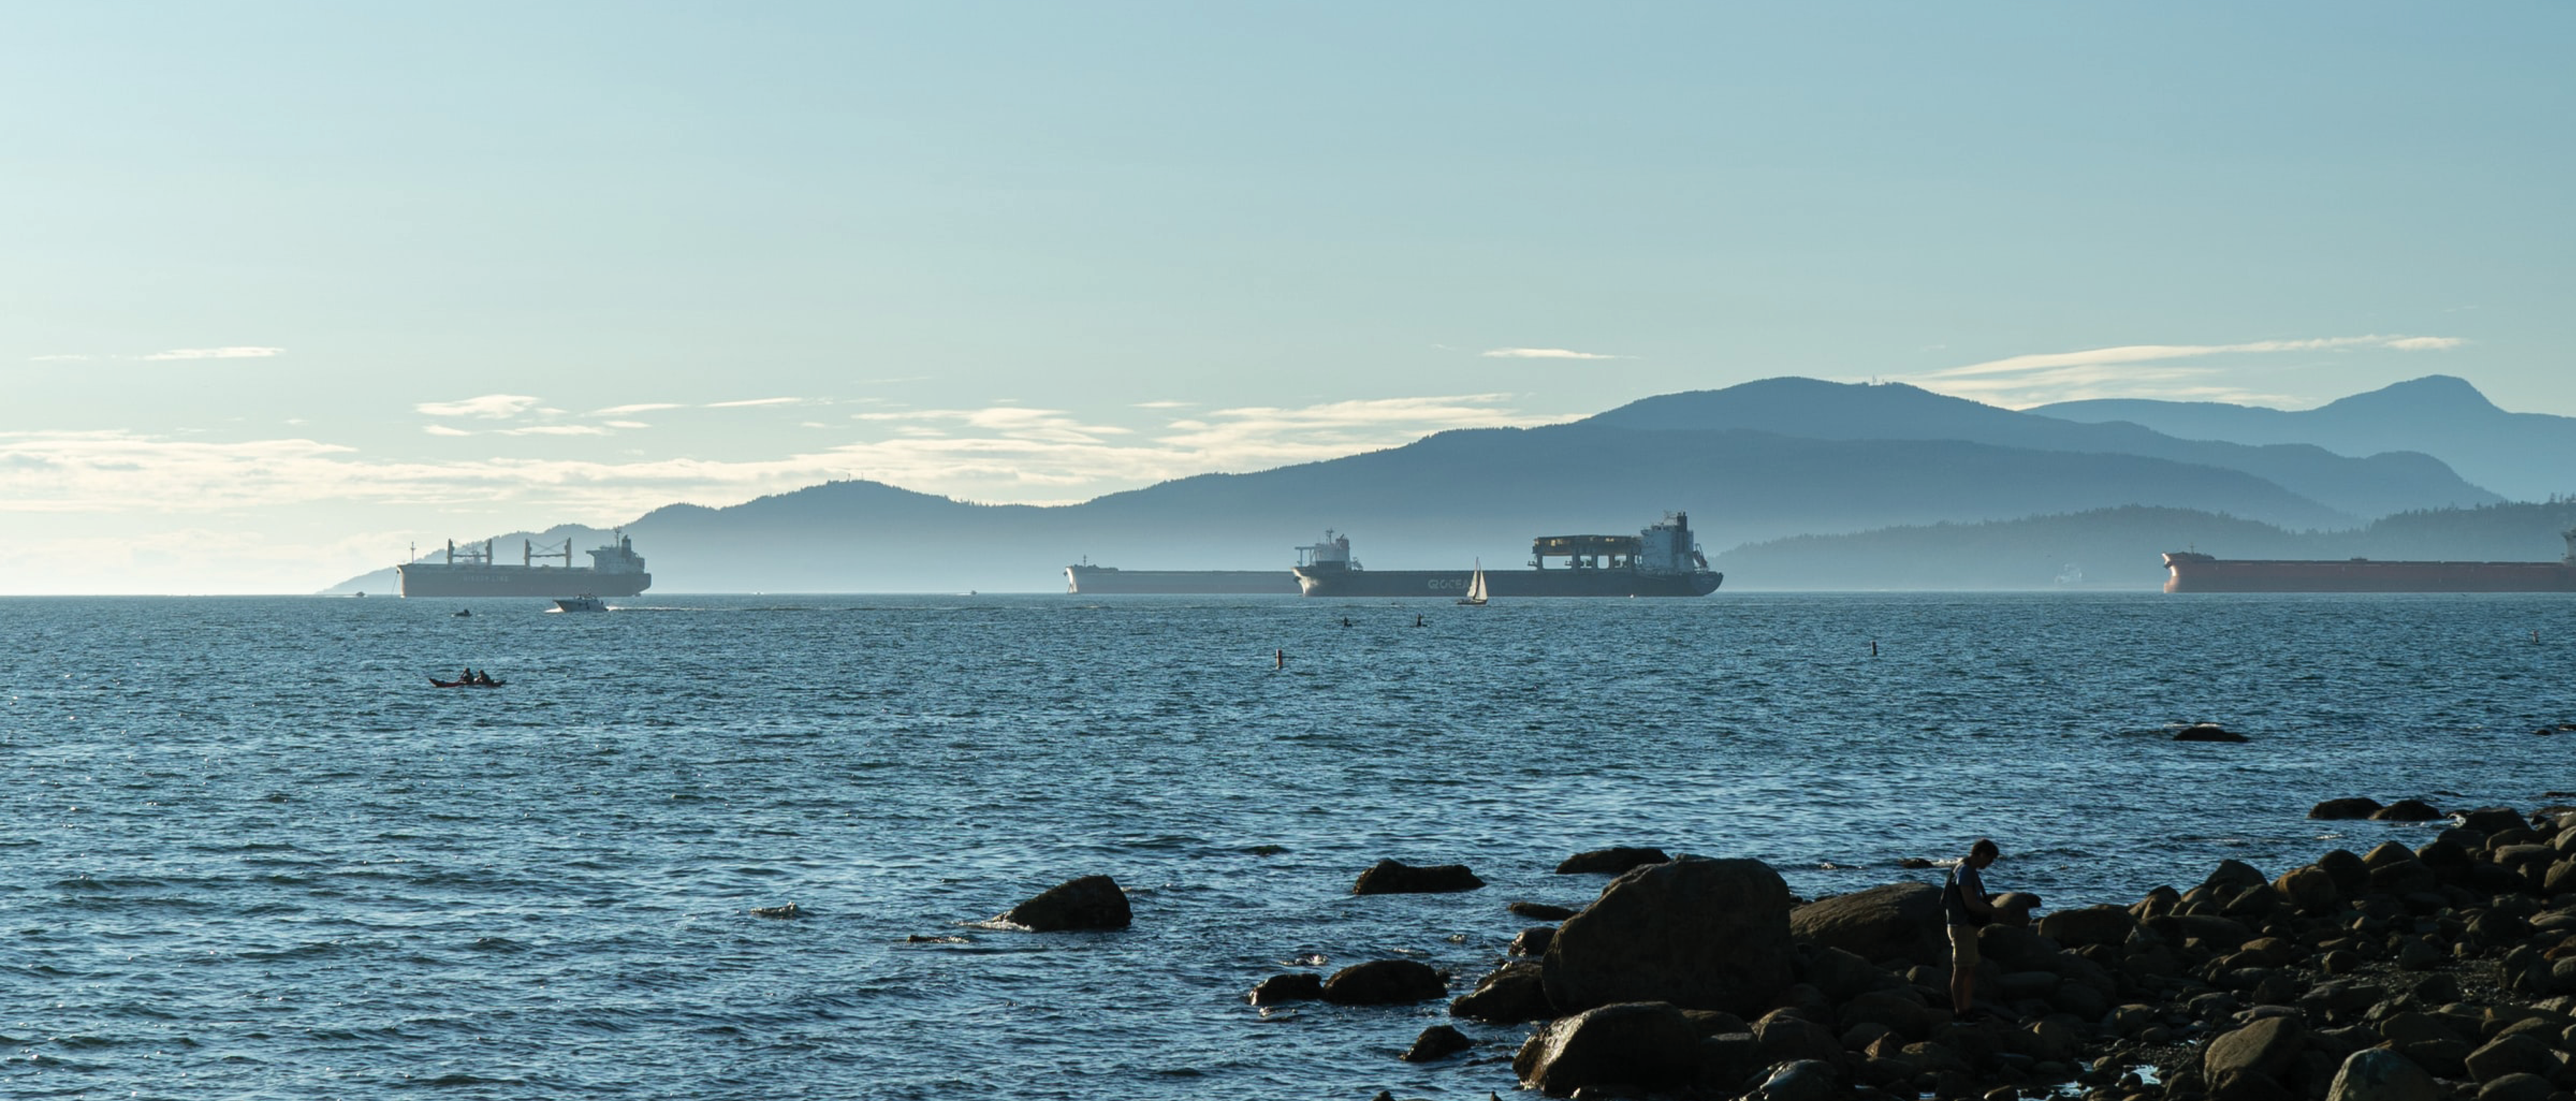 Container ships in English Bay, looking north from Spanish Banks to the mountains in West Vancouver.